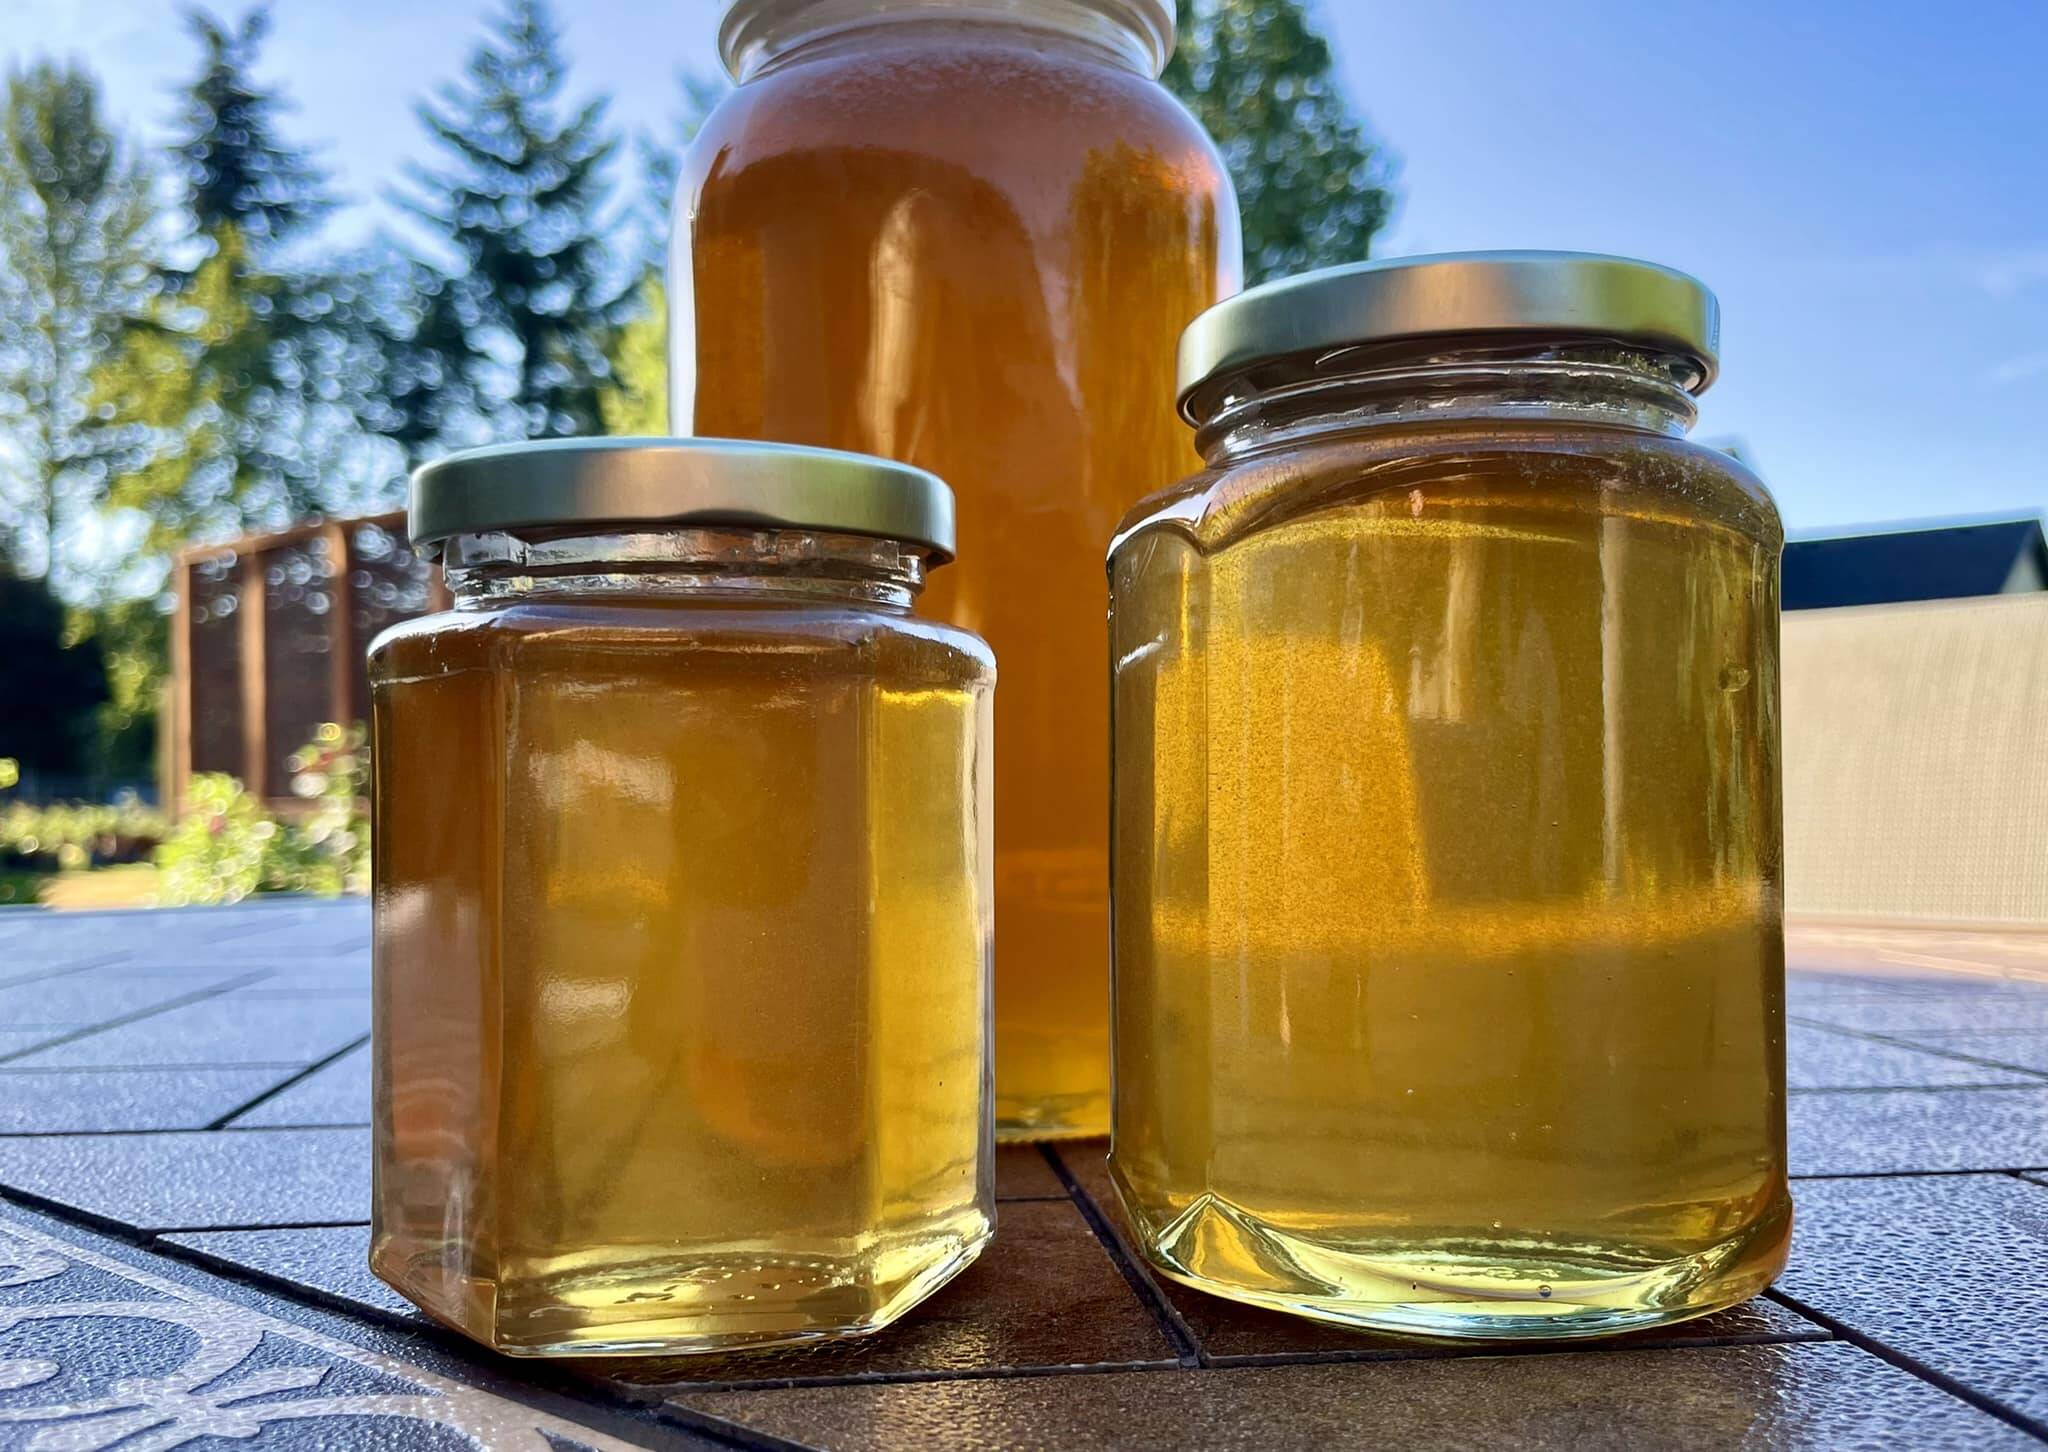 Courtesy photos.
The Snoqualmie Valley Beekeepers Association members often sell their honey at events such as Snoqualmie Days and Fall City Days.